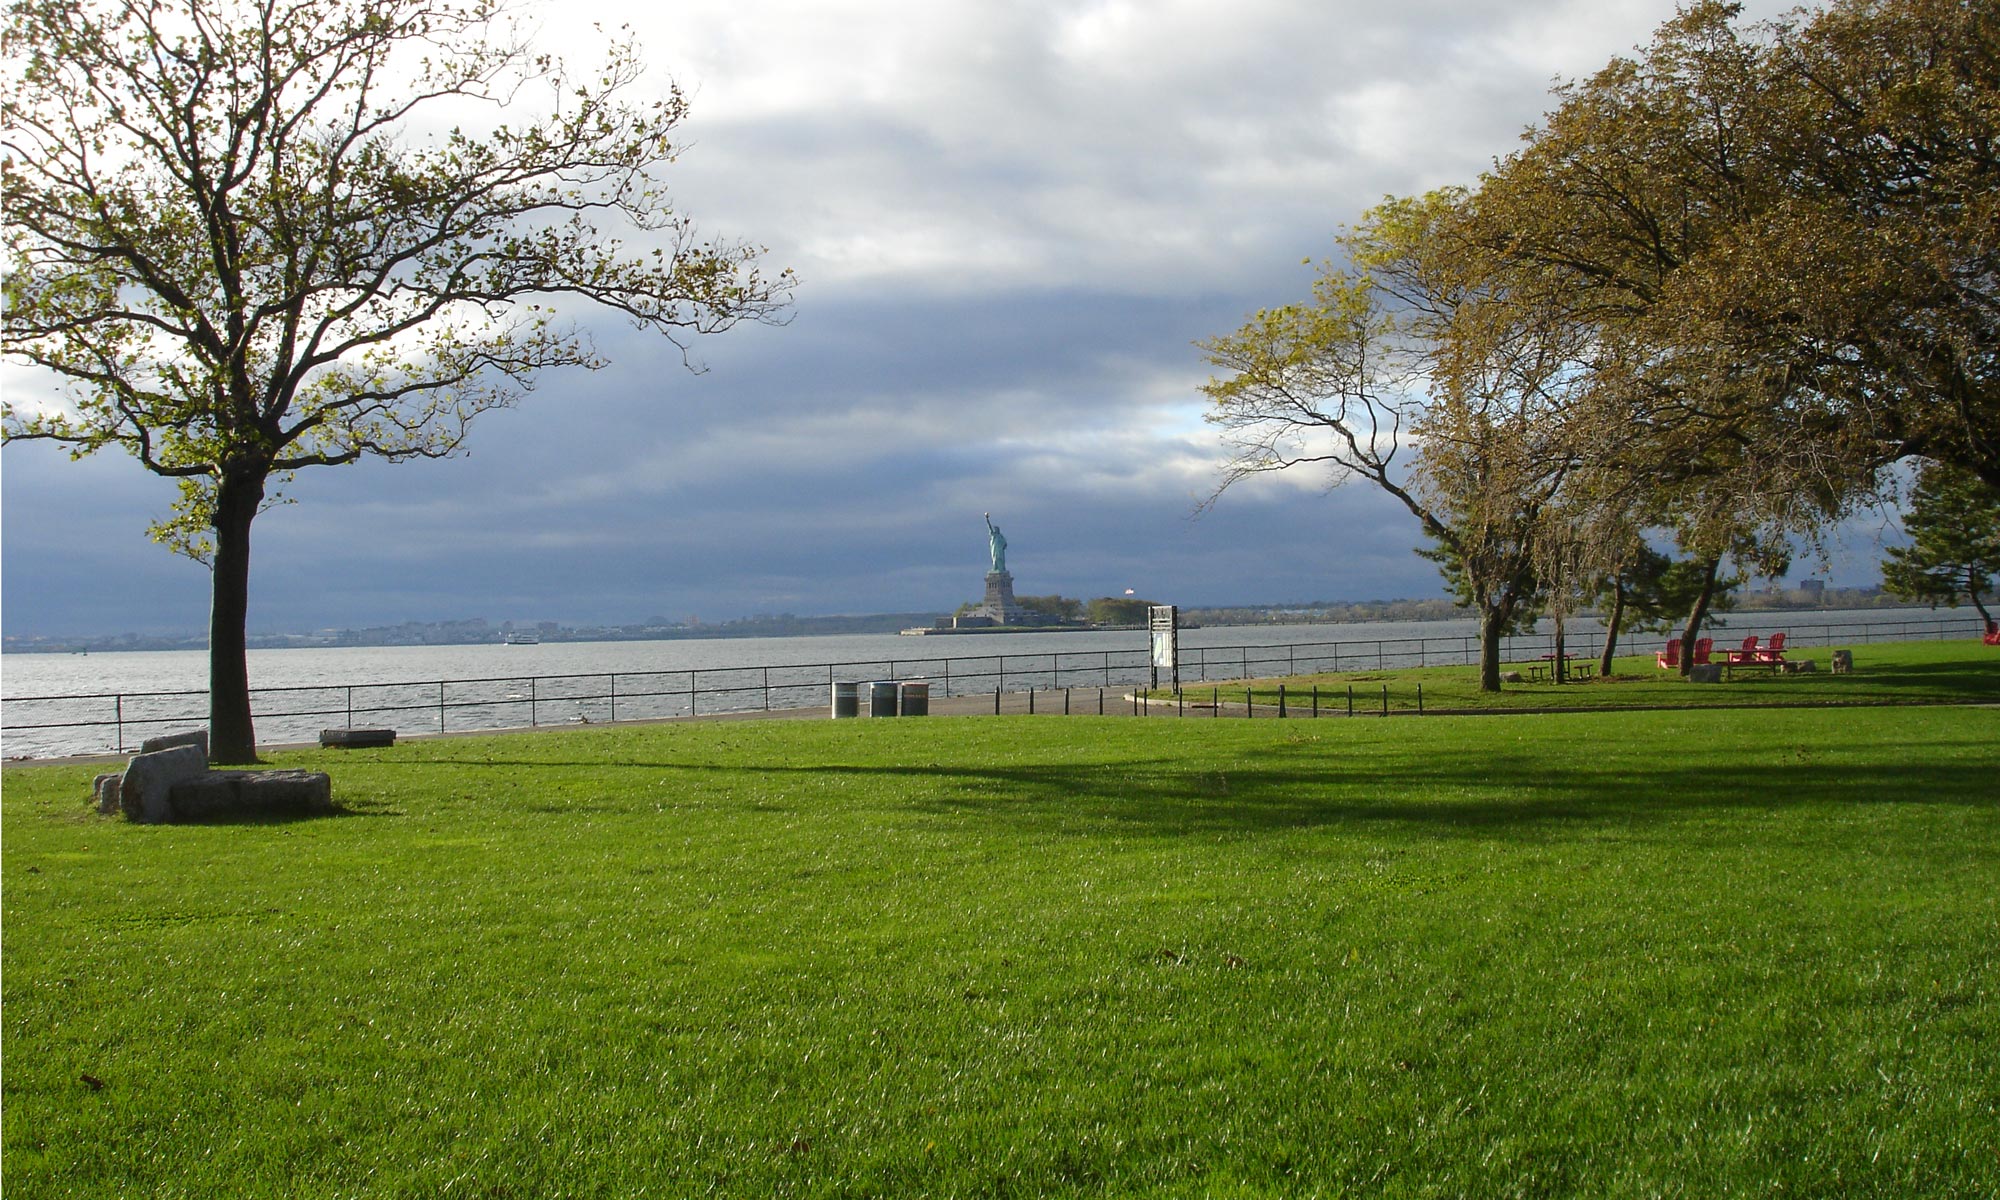 Statue of Liberty from Governor's Island